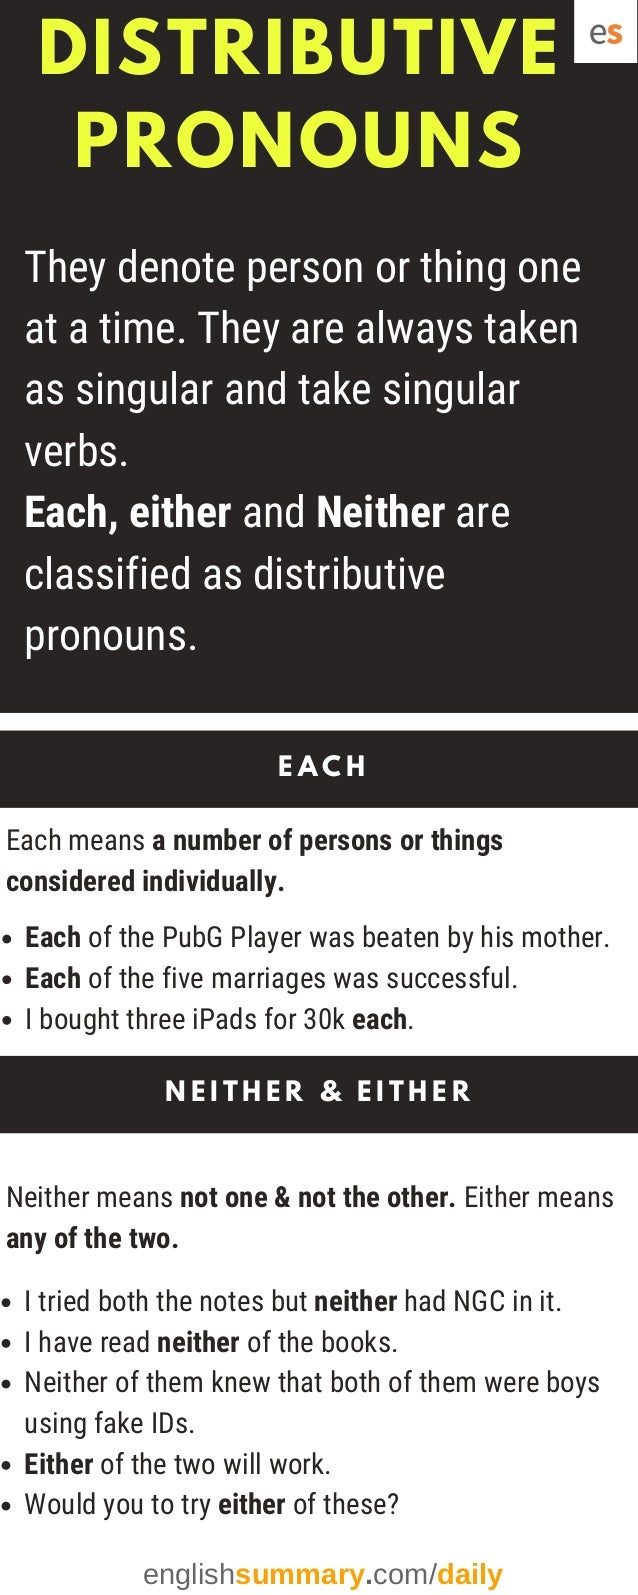 distributive-pronouns-with-examples